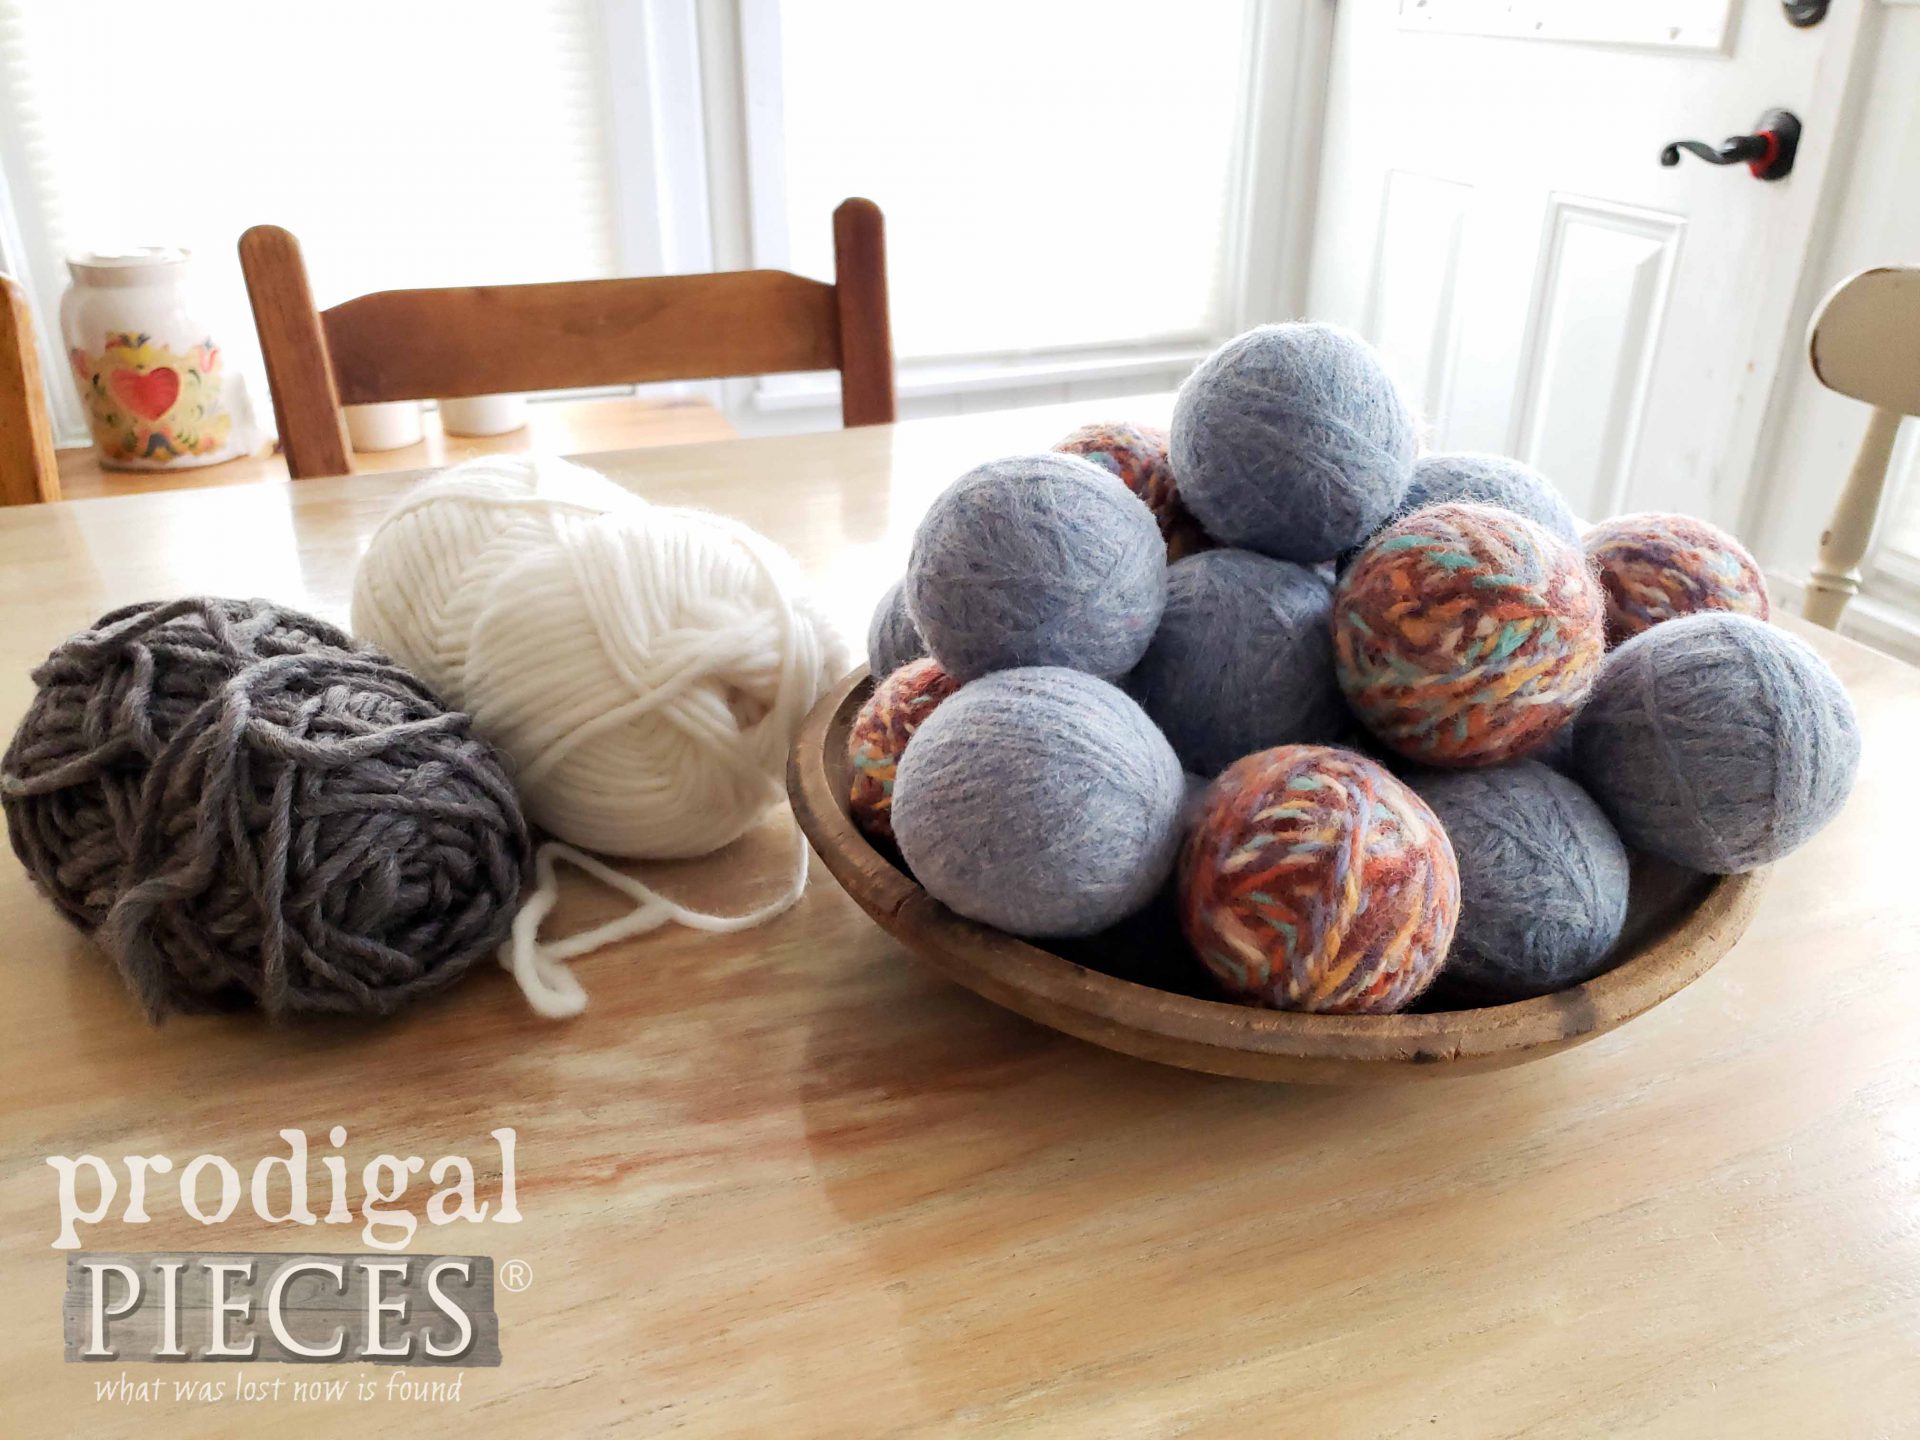 DIY Wool Dryer Balls from and Upcycled Sweater with Video Tutorial by Larissa of Prodigal Pieces | prodigalpieces.com #prodigalpieces #farmhouse #laundry #crafts #diy #home #upcycle